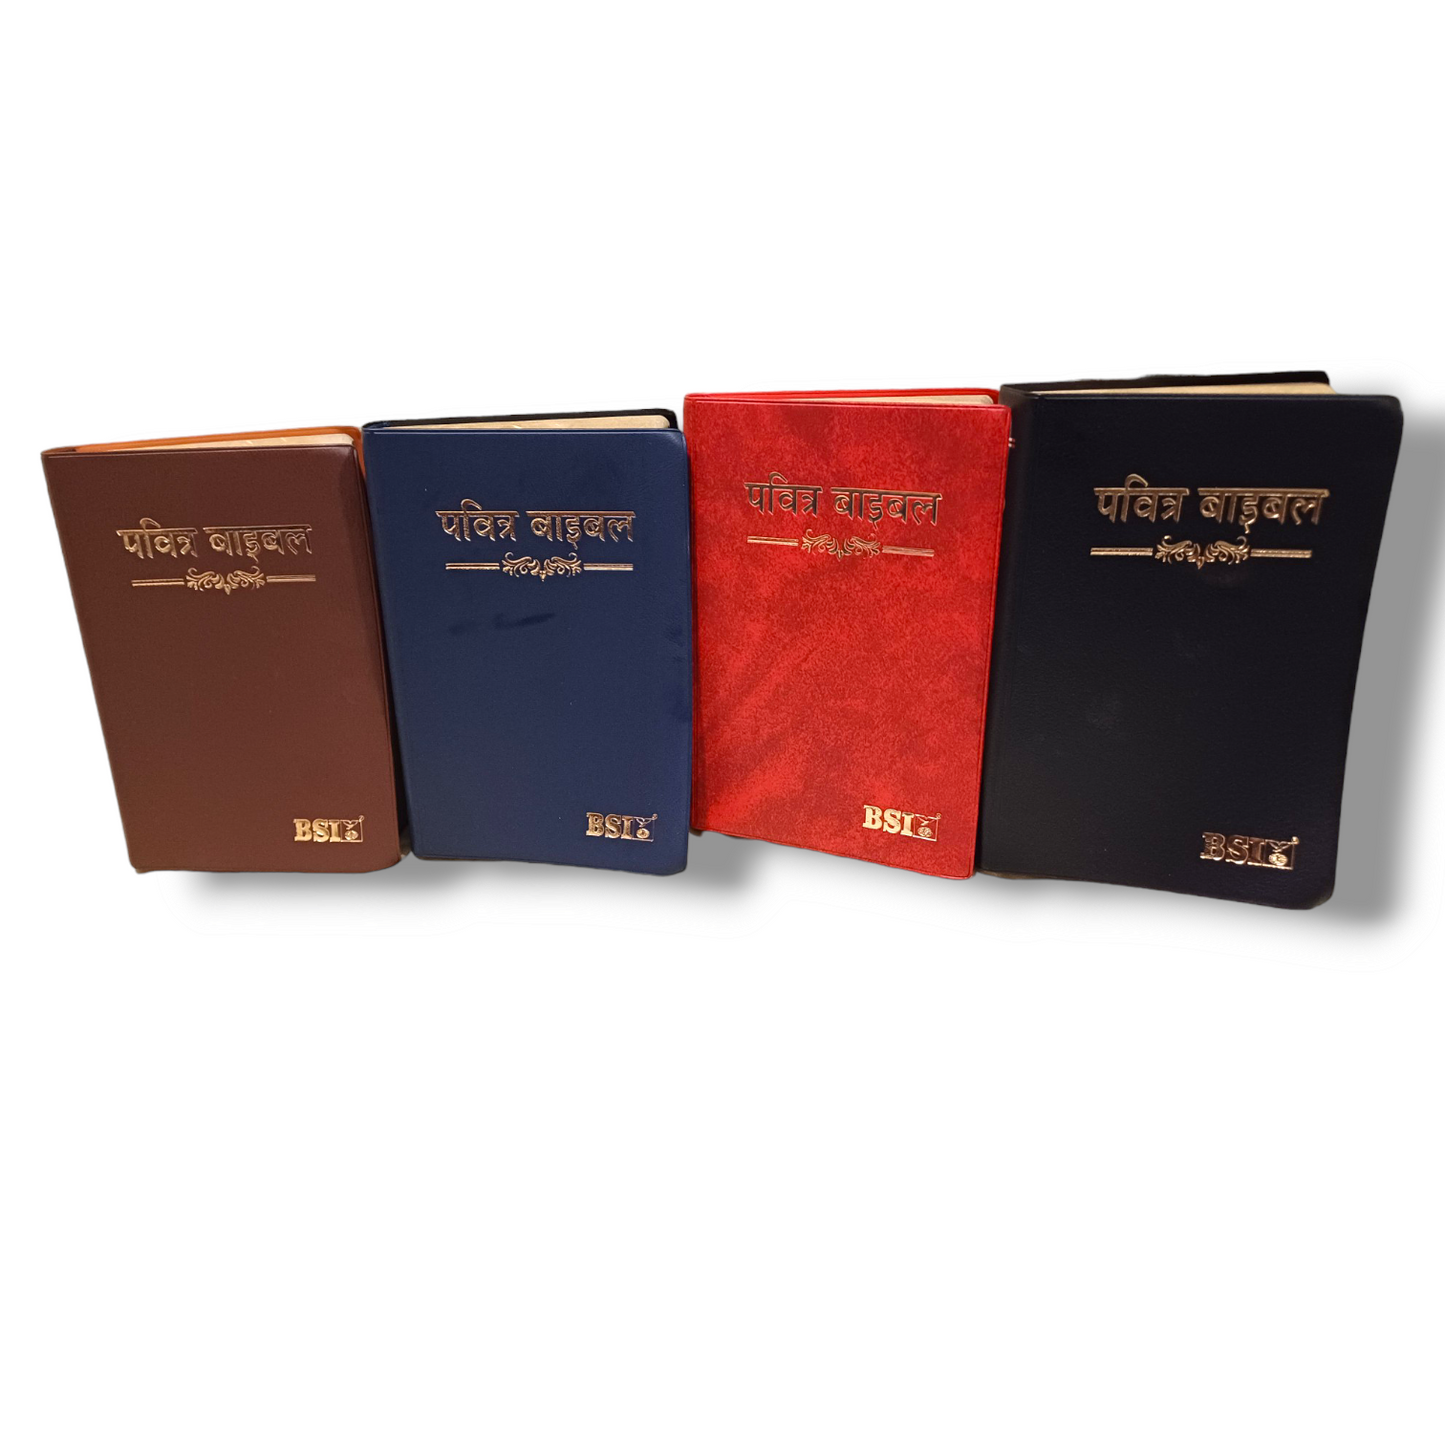 The Holy Bible In Hindi |Hindi Compact Size Bible |Golden Edge Bible |Crown Bible In All In Color Combo offer